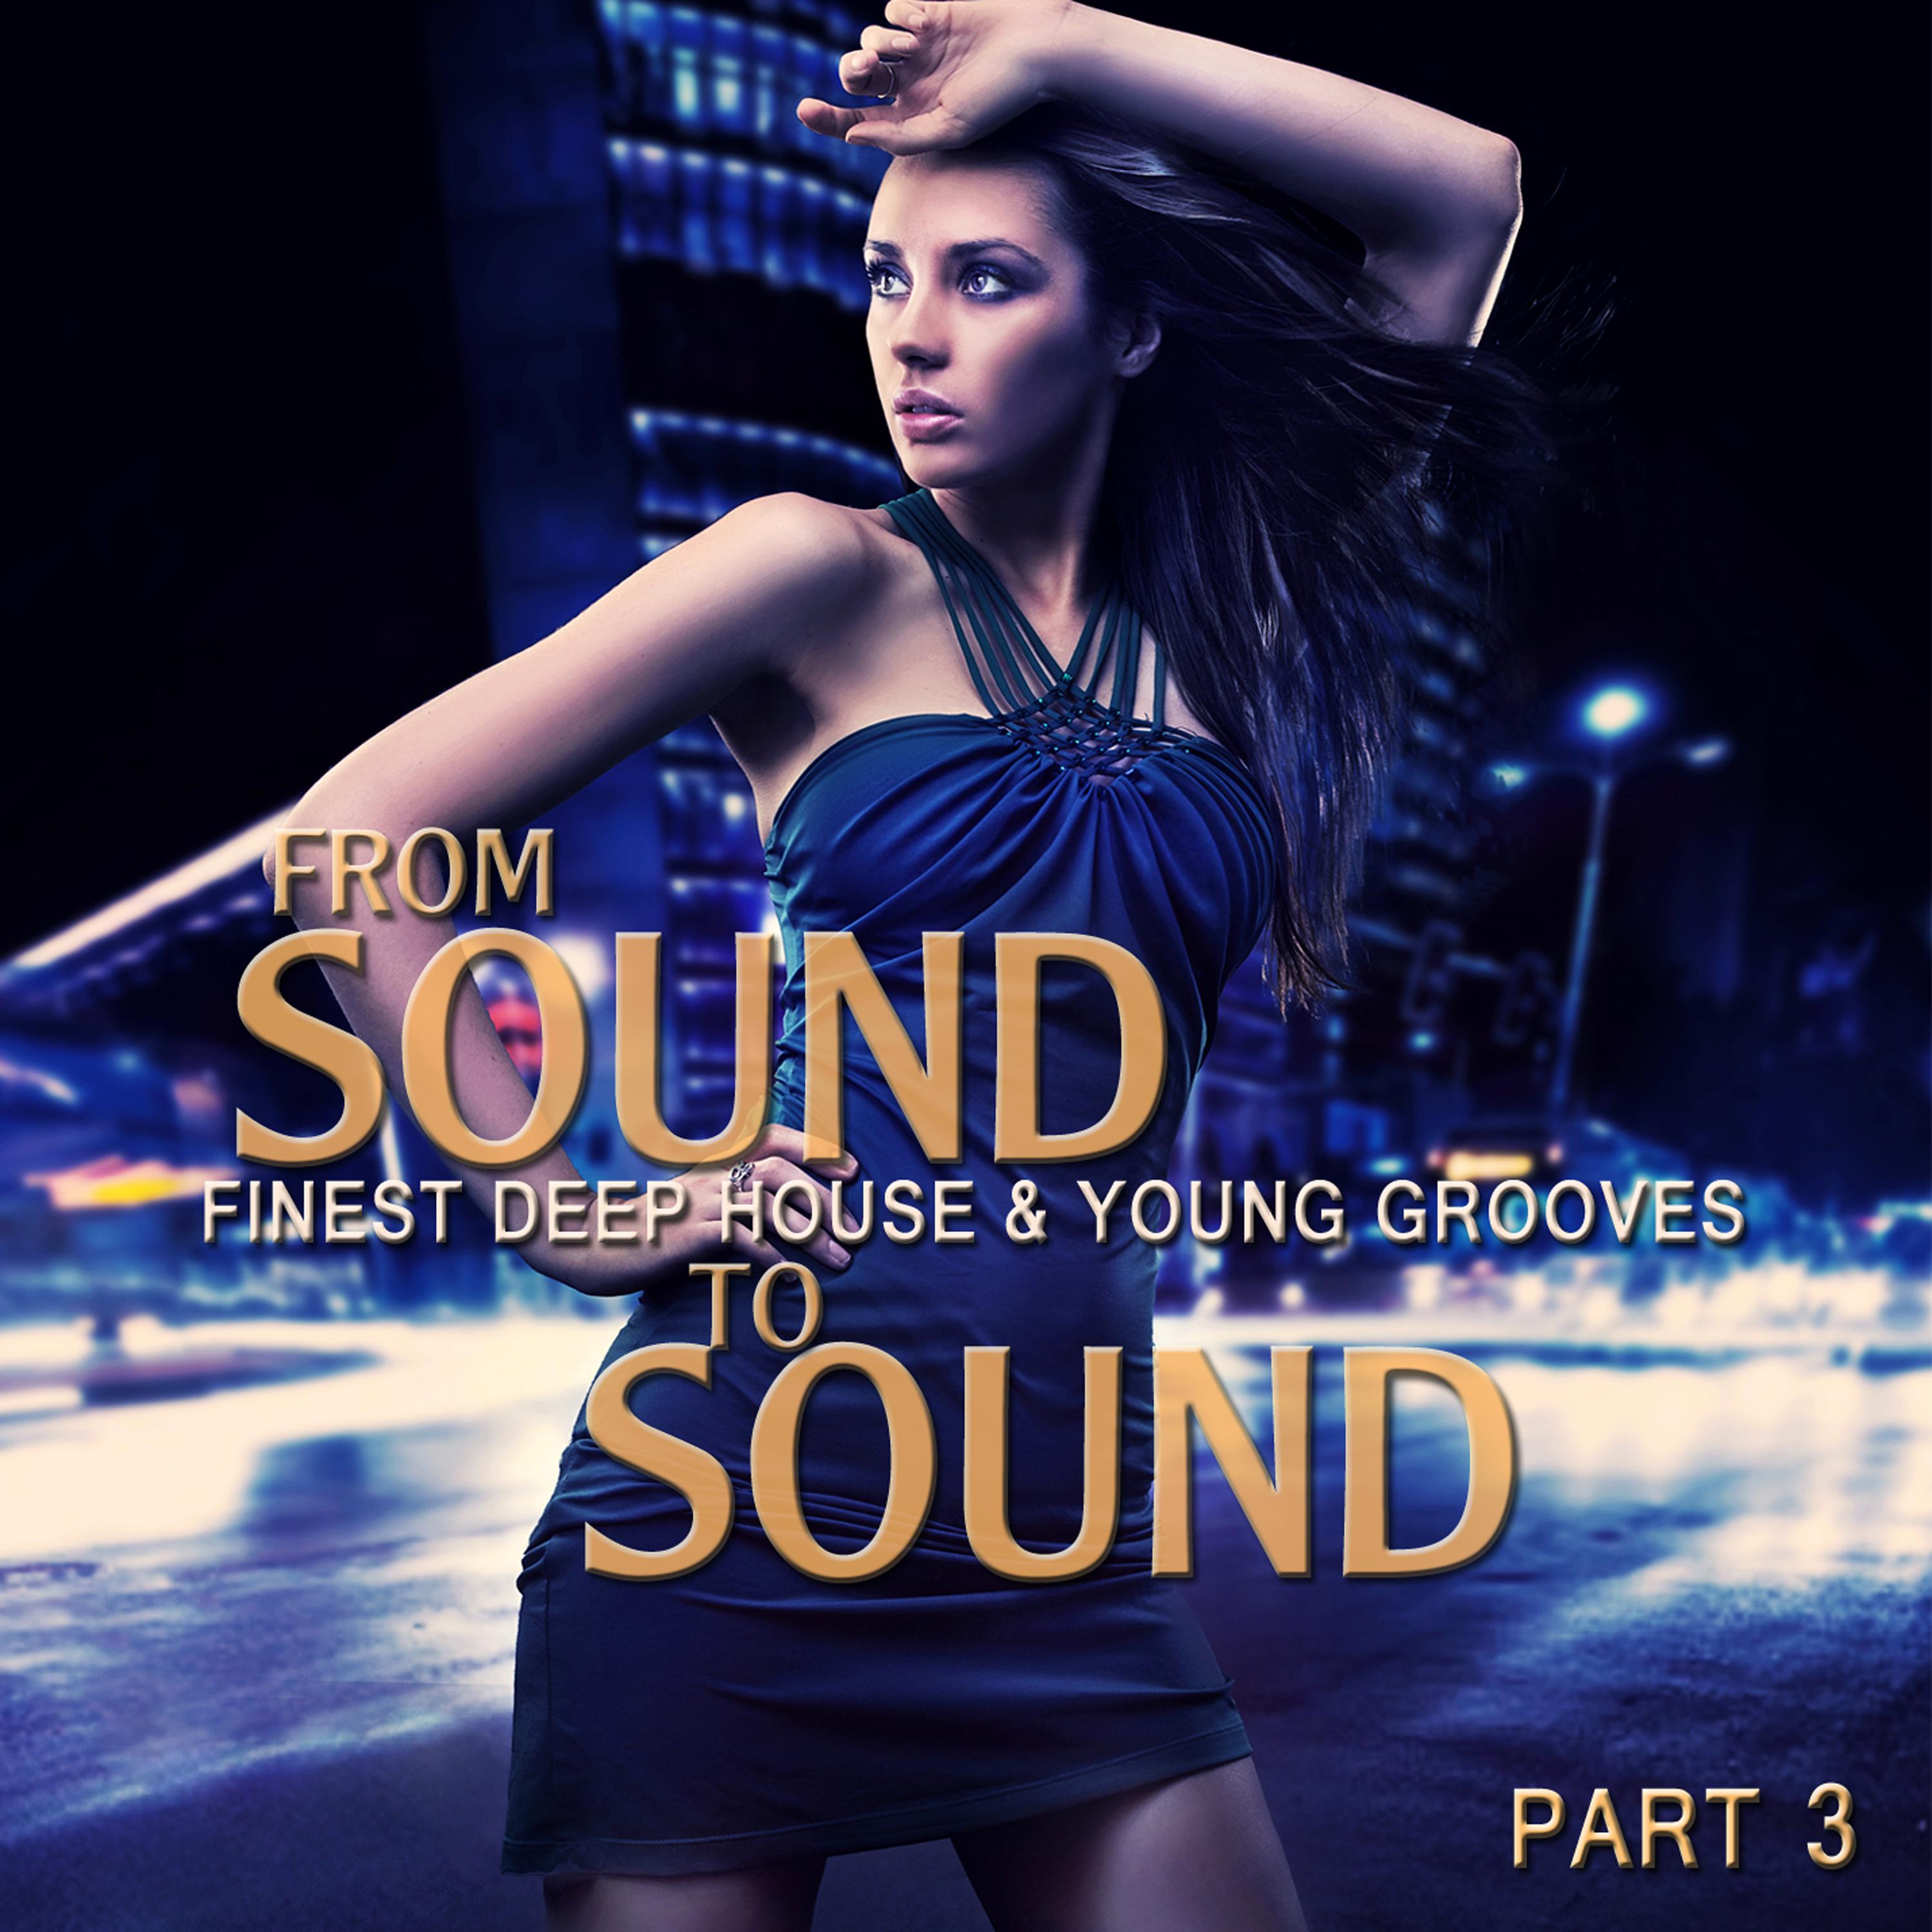 From Sound to Sound, Pt. 3 (Finest Deep House & Young Grooves)